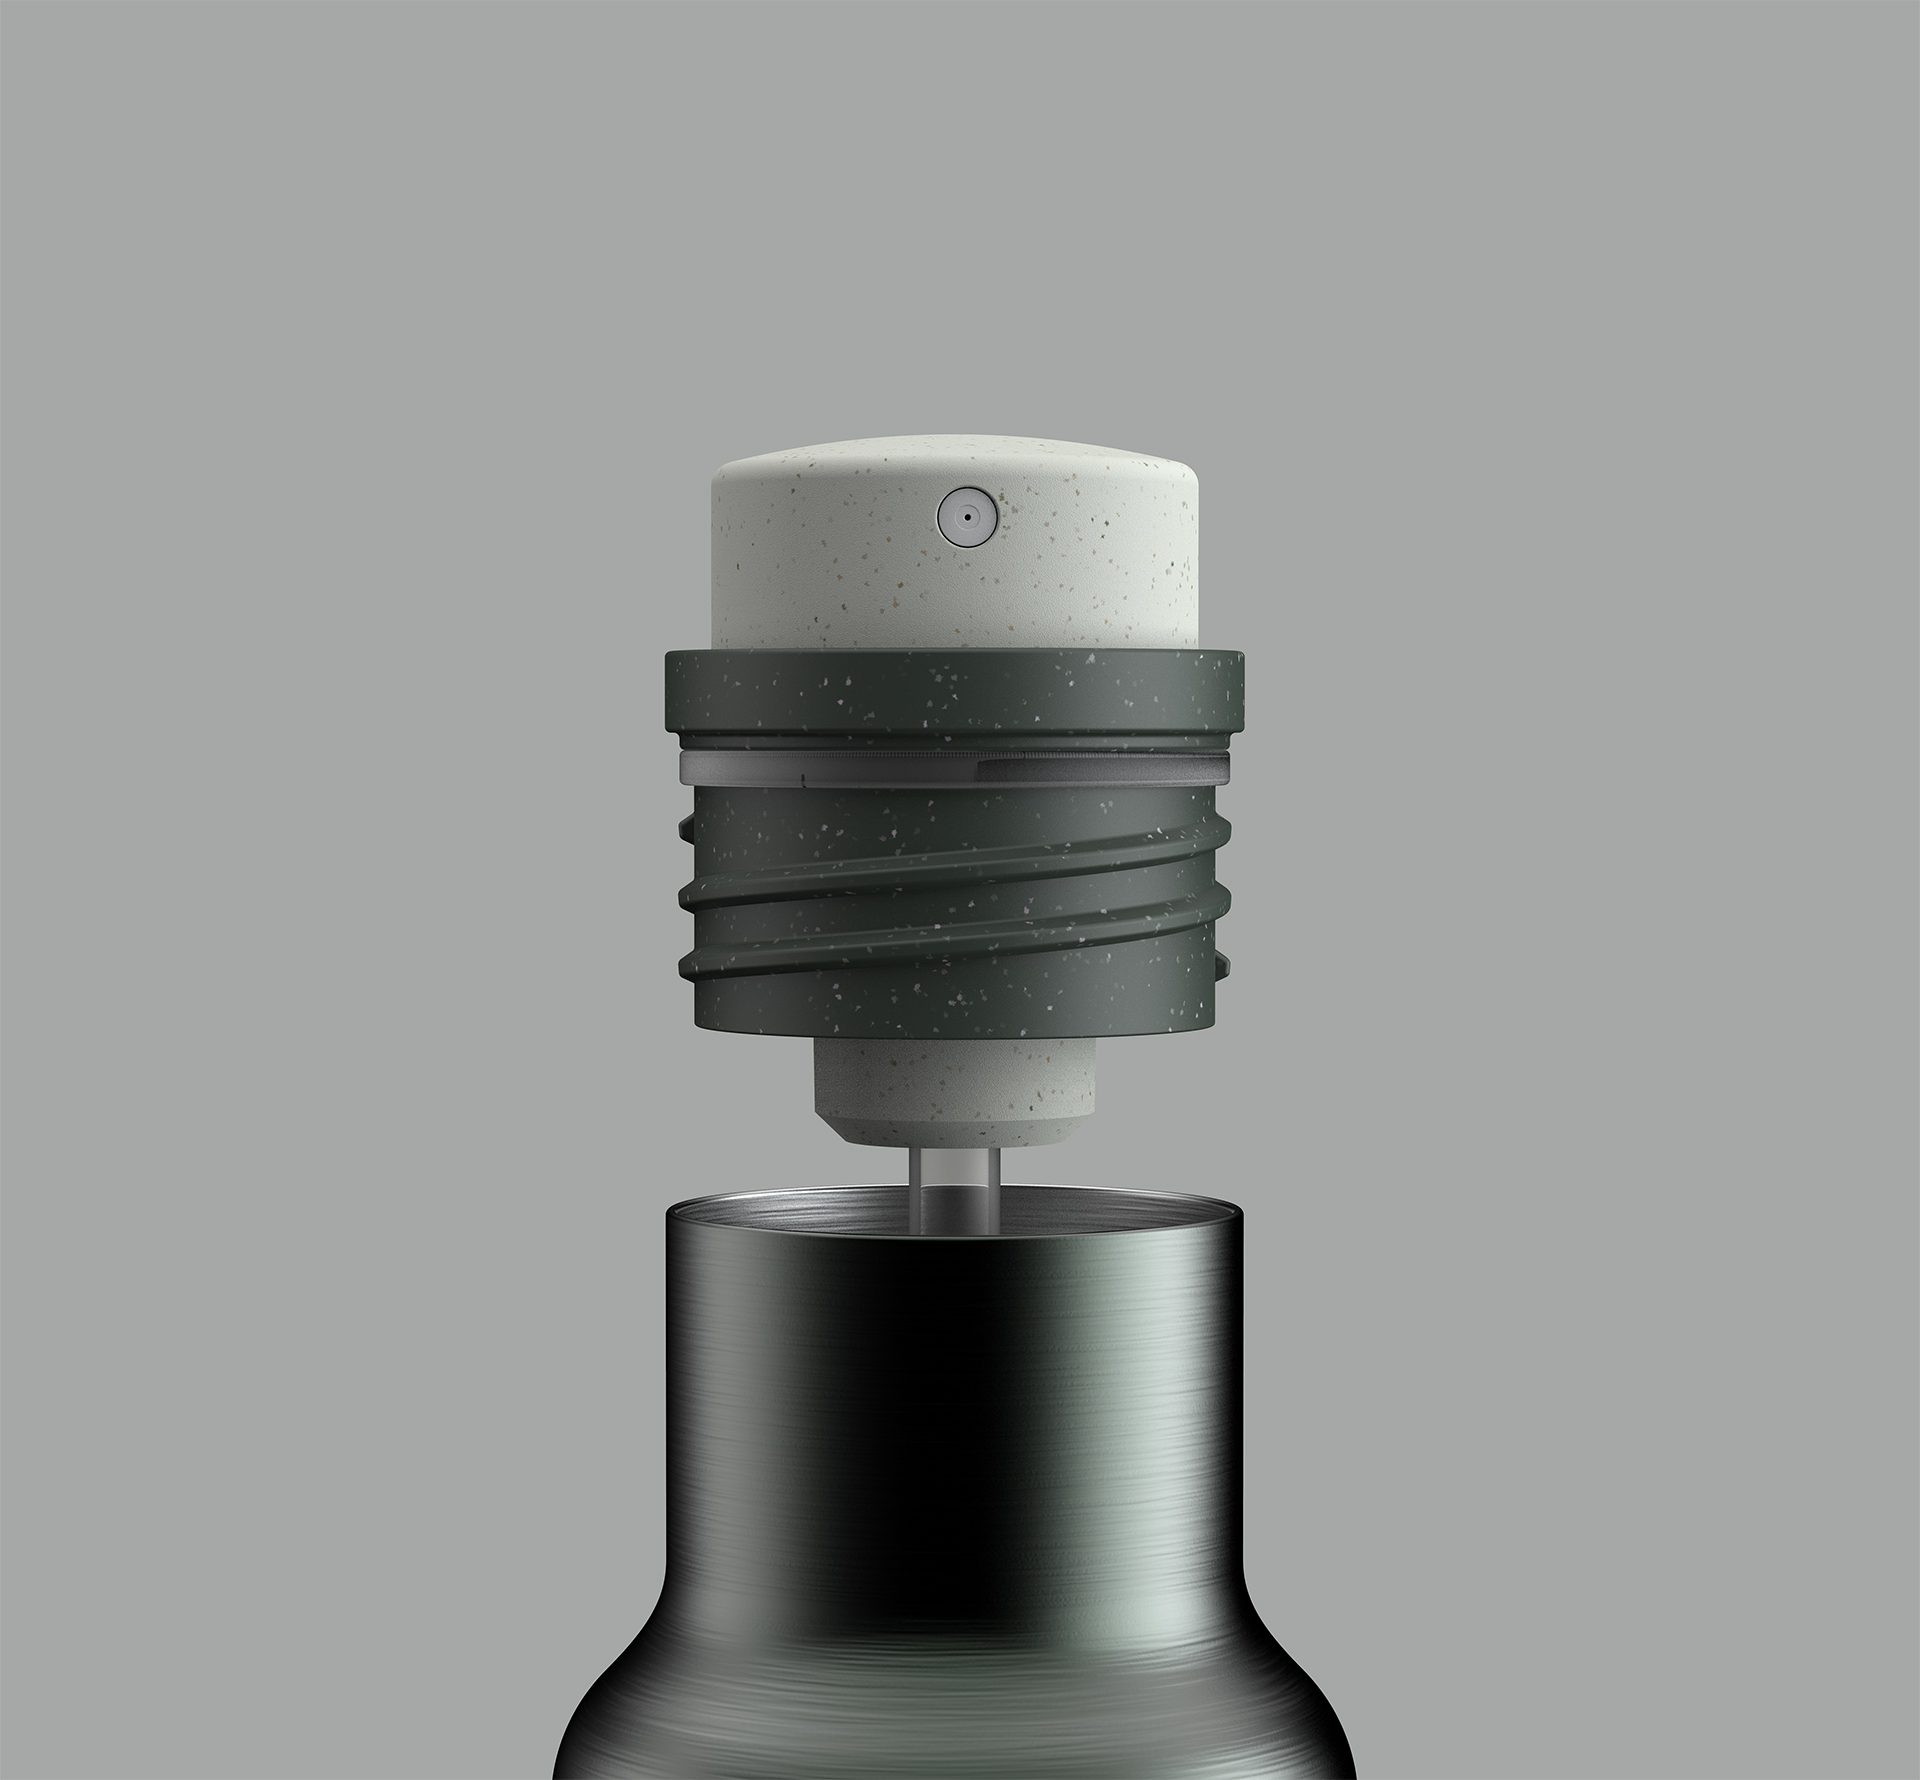 a CGI render showing the sparay nozzle of the essence cleaning bottle designed by Rodd